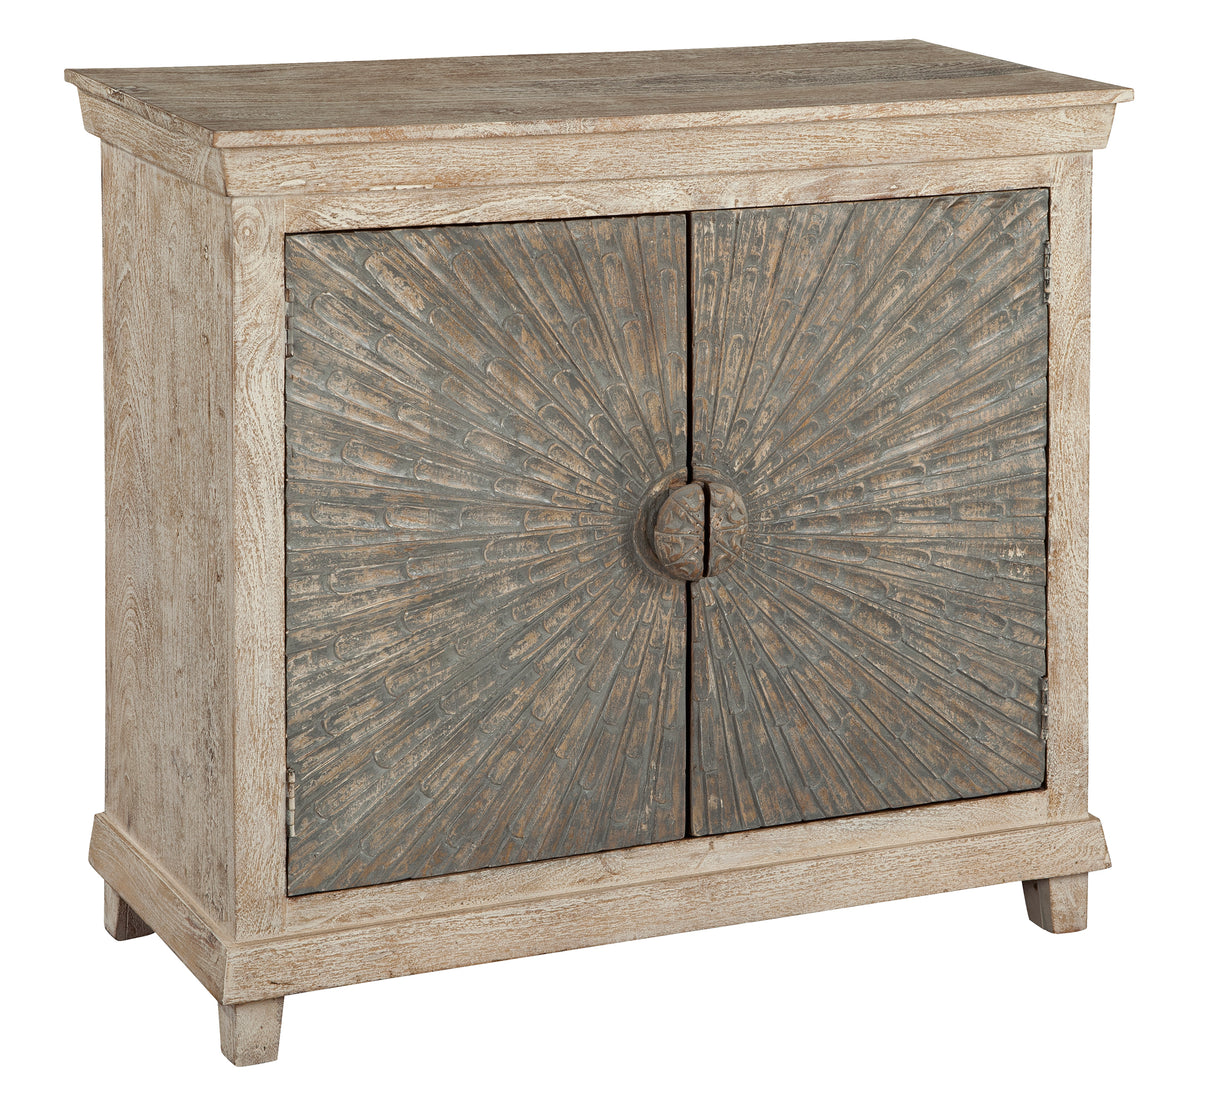 Hekman 27914 Accents 39in. x 17in. x 36.5in. Accent Chest